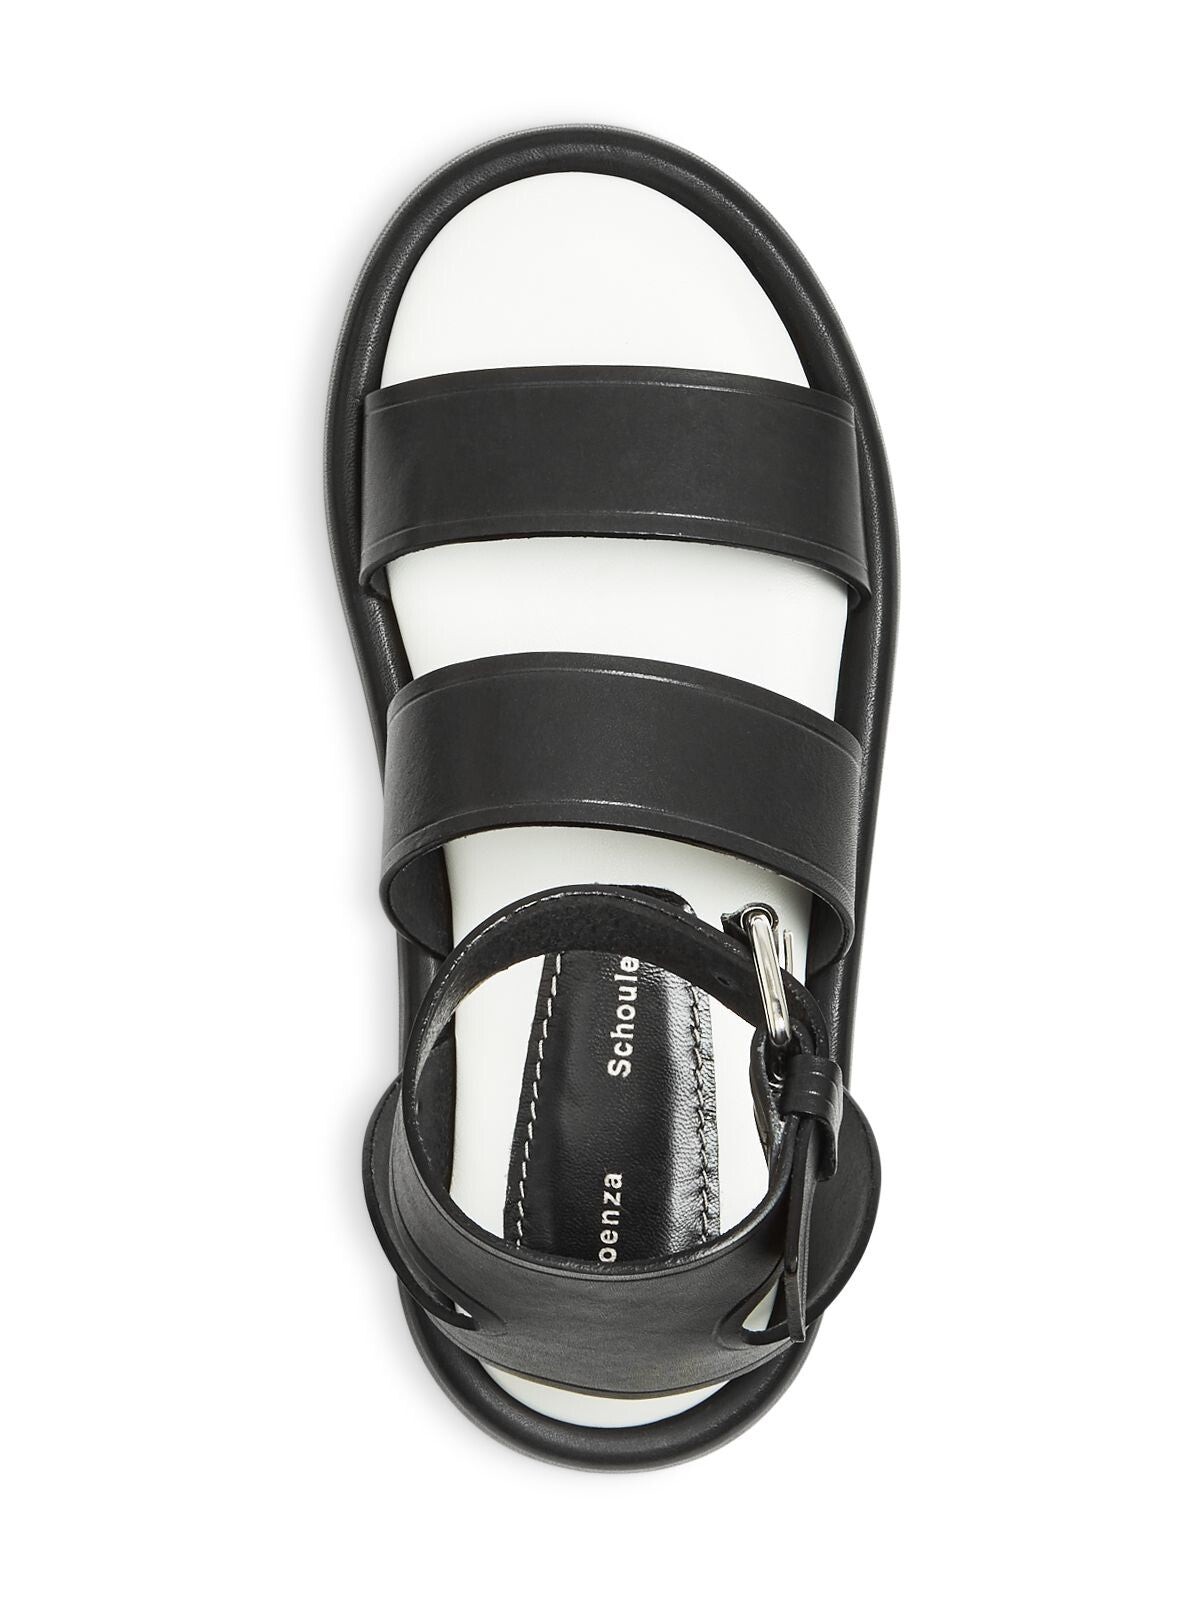 PROENZA SCHOULER Womens Black Ankle Strap Padded Round Toe Platform Buckle Leather Sandals Shoes